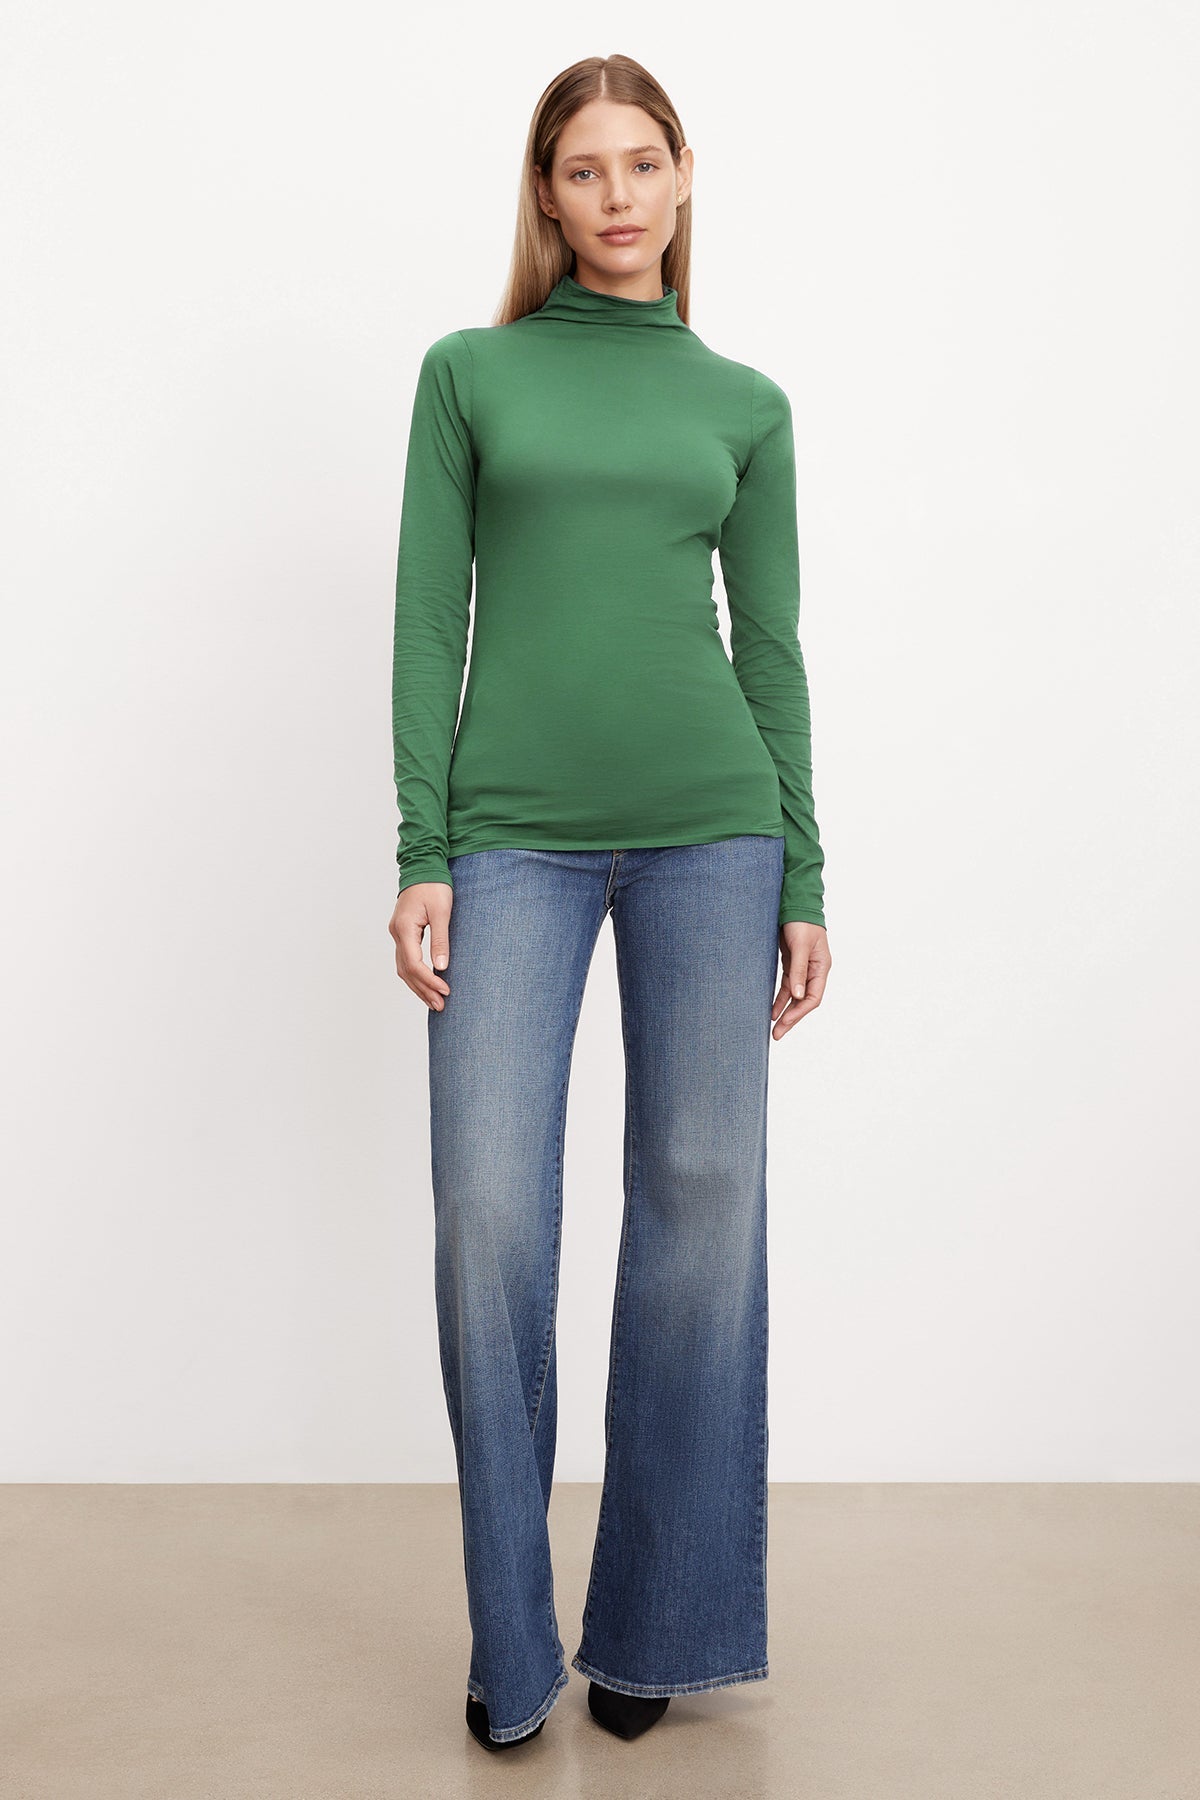   A woman donning a trendy TALISIA GAUZY WHISPER FITTED MOCK NECK TEE by Velvet by Graham & Spencer and flared jeans, showcasing her fashion world prowess. 